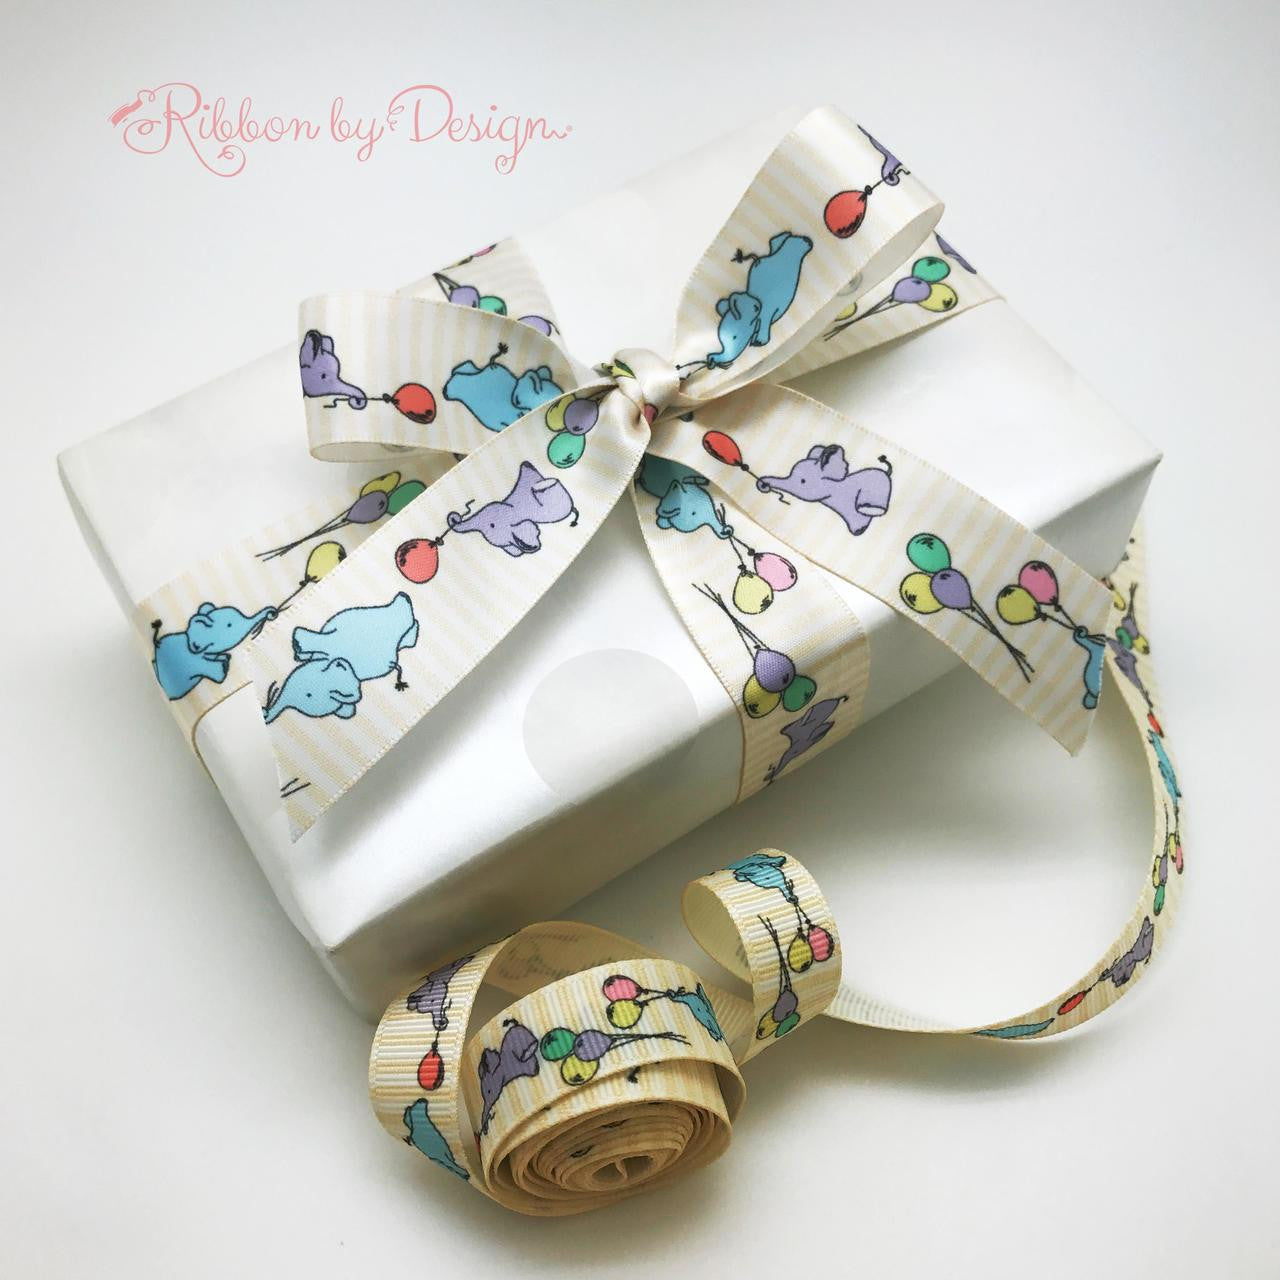 We loved this ribbon design so much we created it in satin and grosgrain! It will make a baby gift really pop when used to tie a gift!